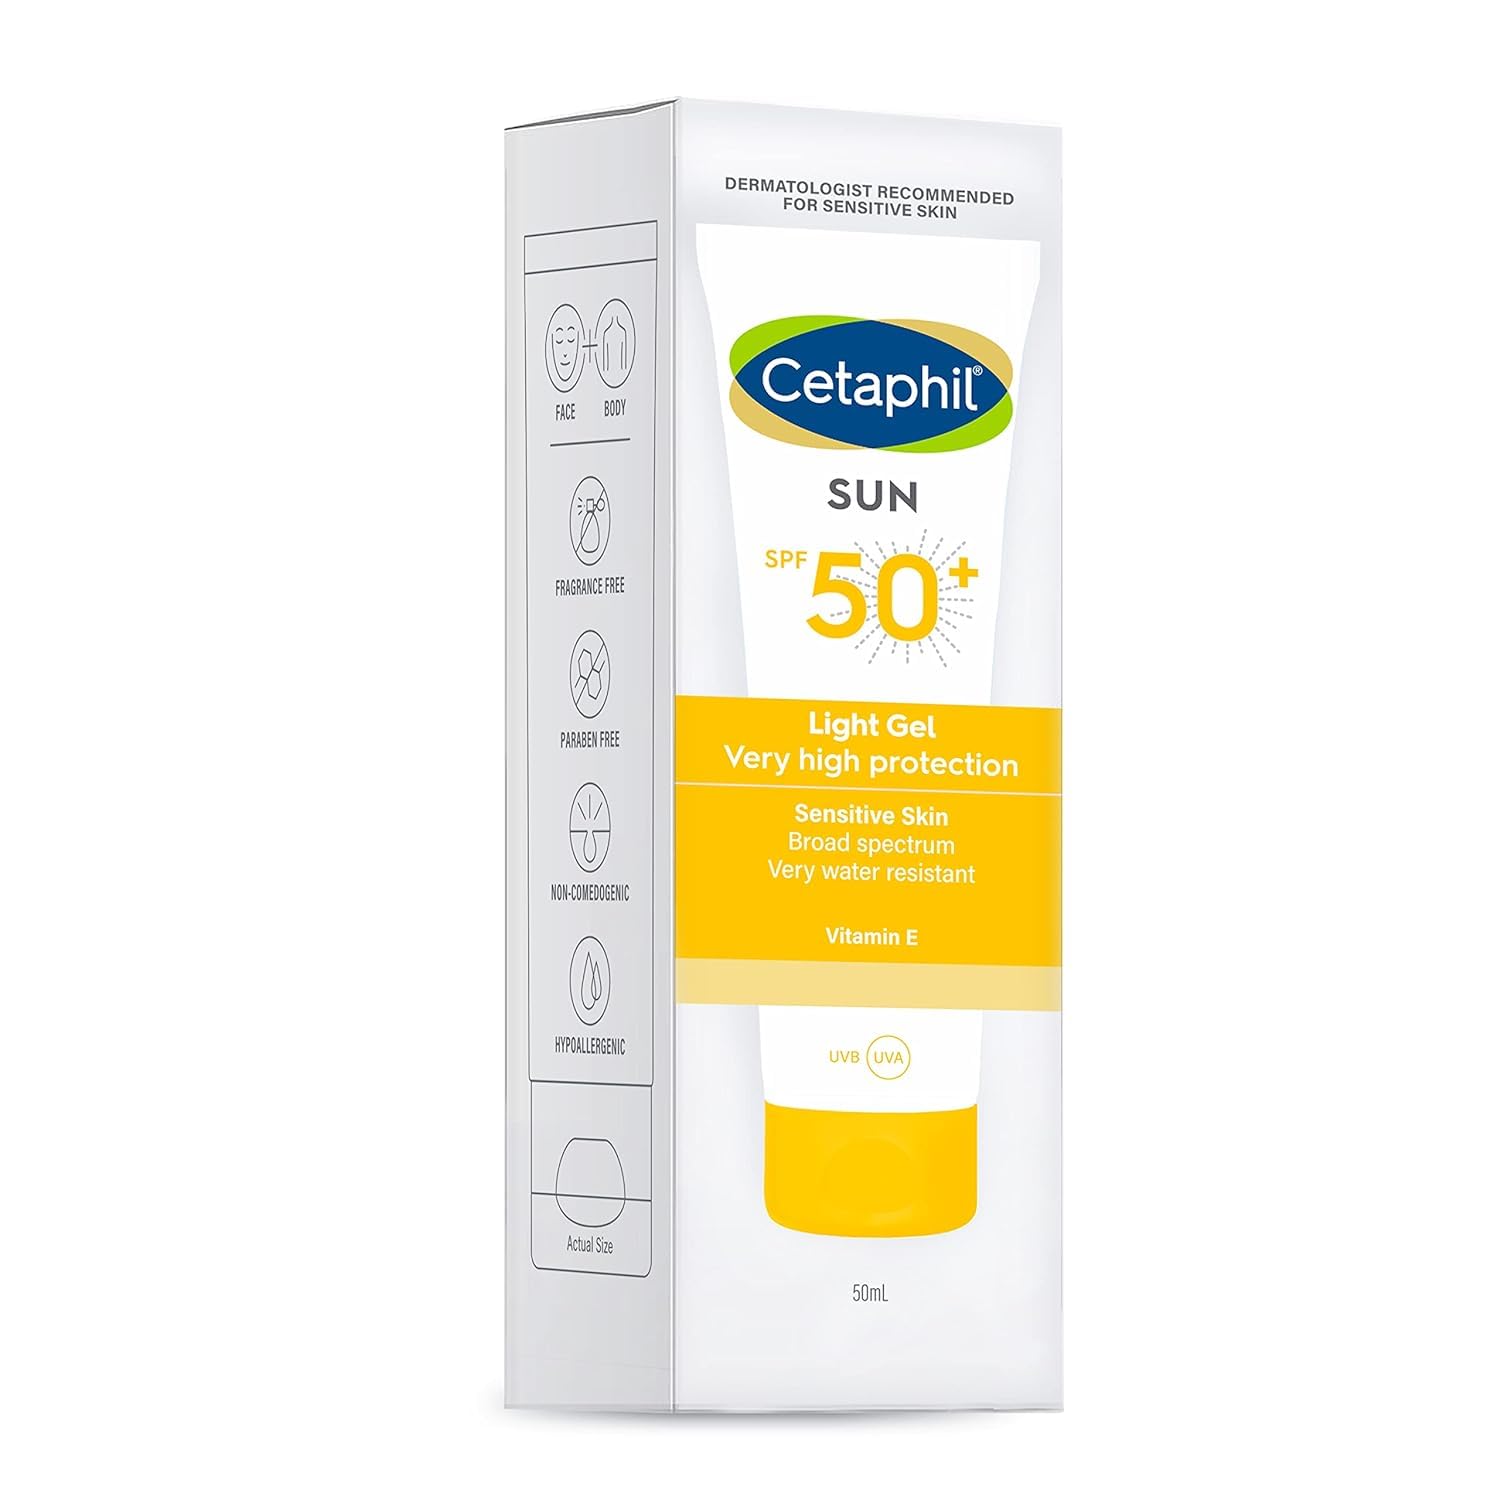 Cetaphil Combination Skin Sun Spf 50 Sunscreen, Very High Protection Light Gel, Water Resistant, Vitamin E, 50 Ml, Pack Of 1